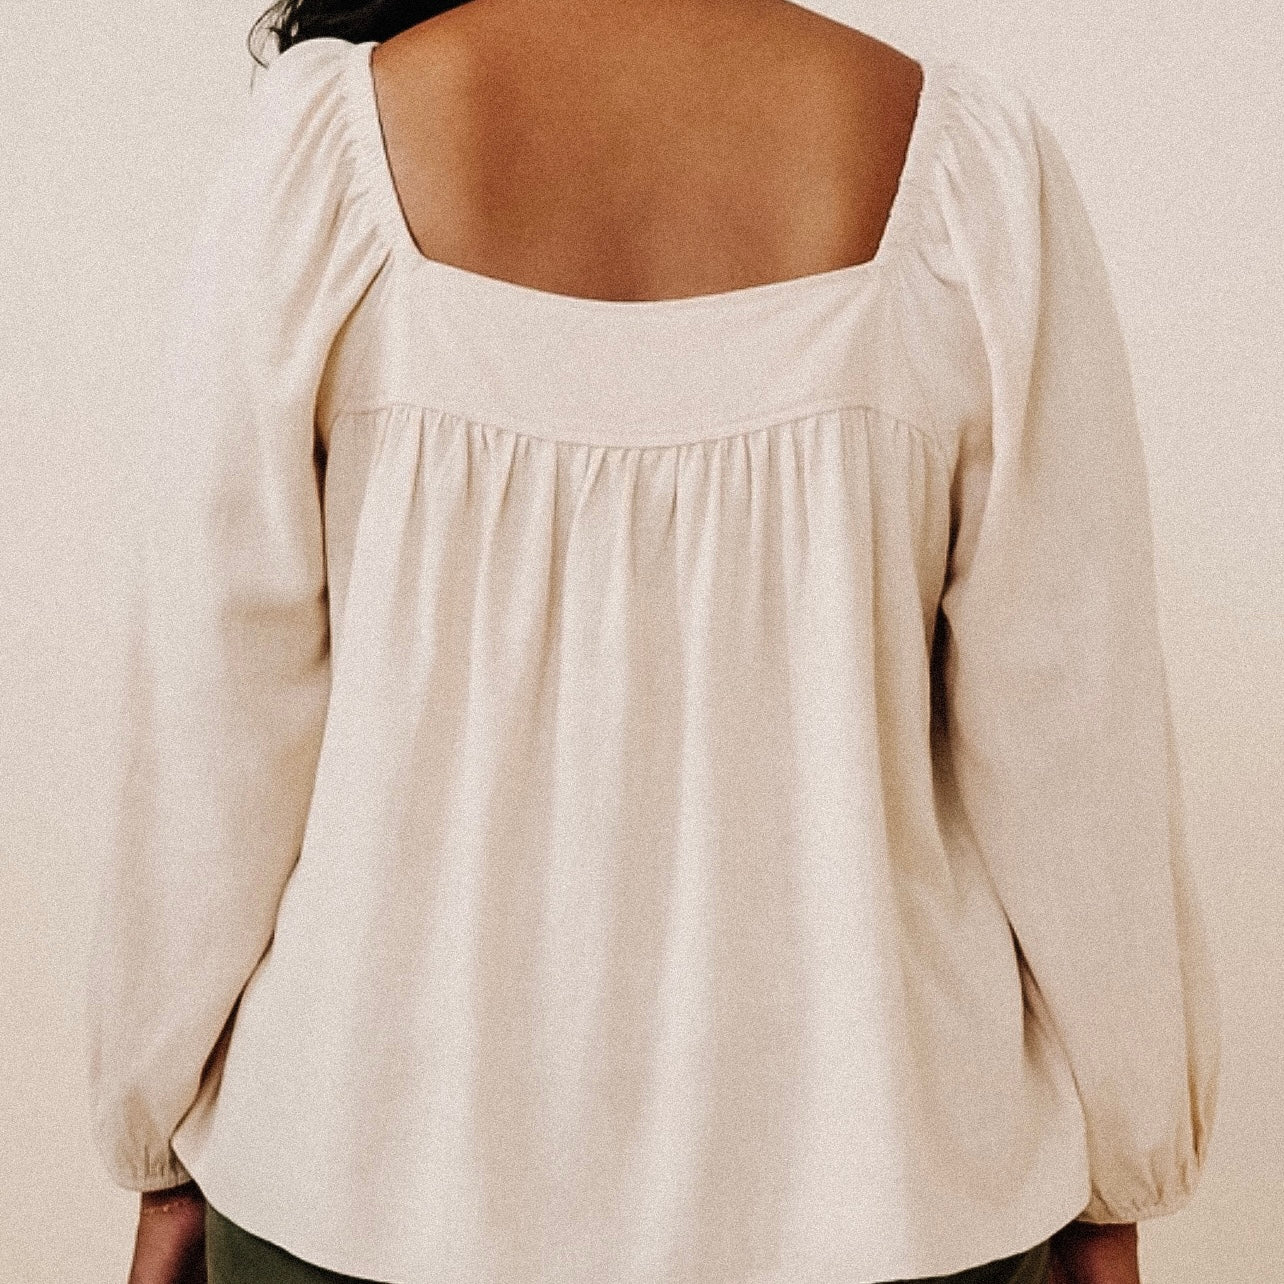 Less Is More Babydoll Top - Cream - LAST ONE